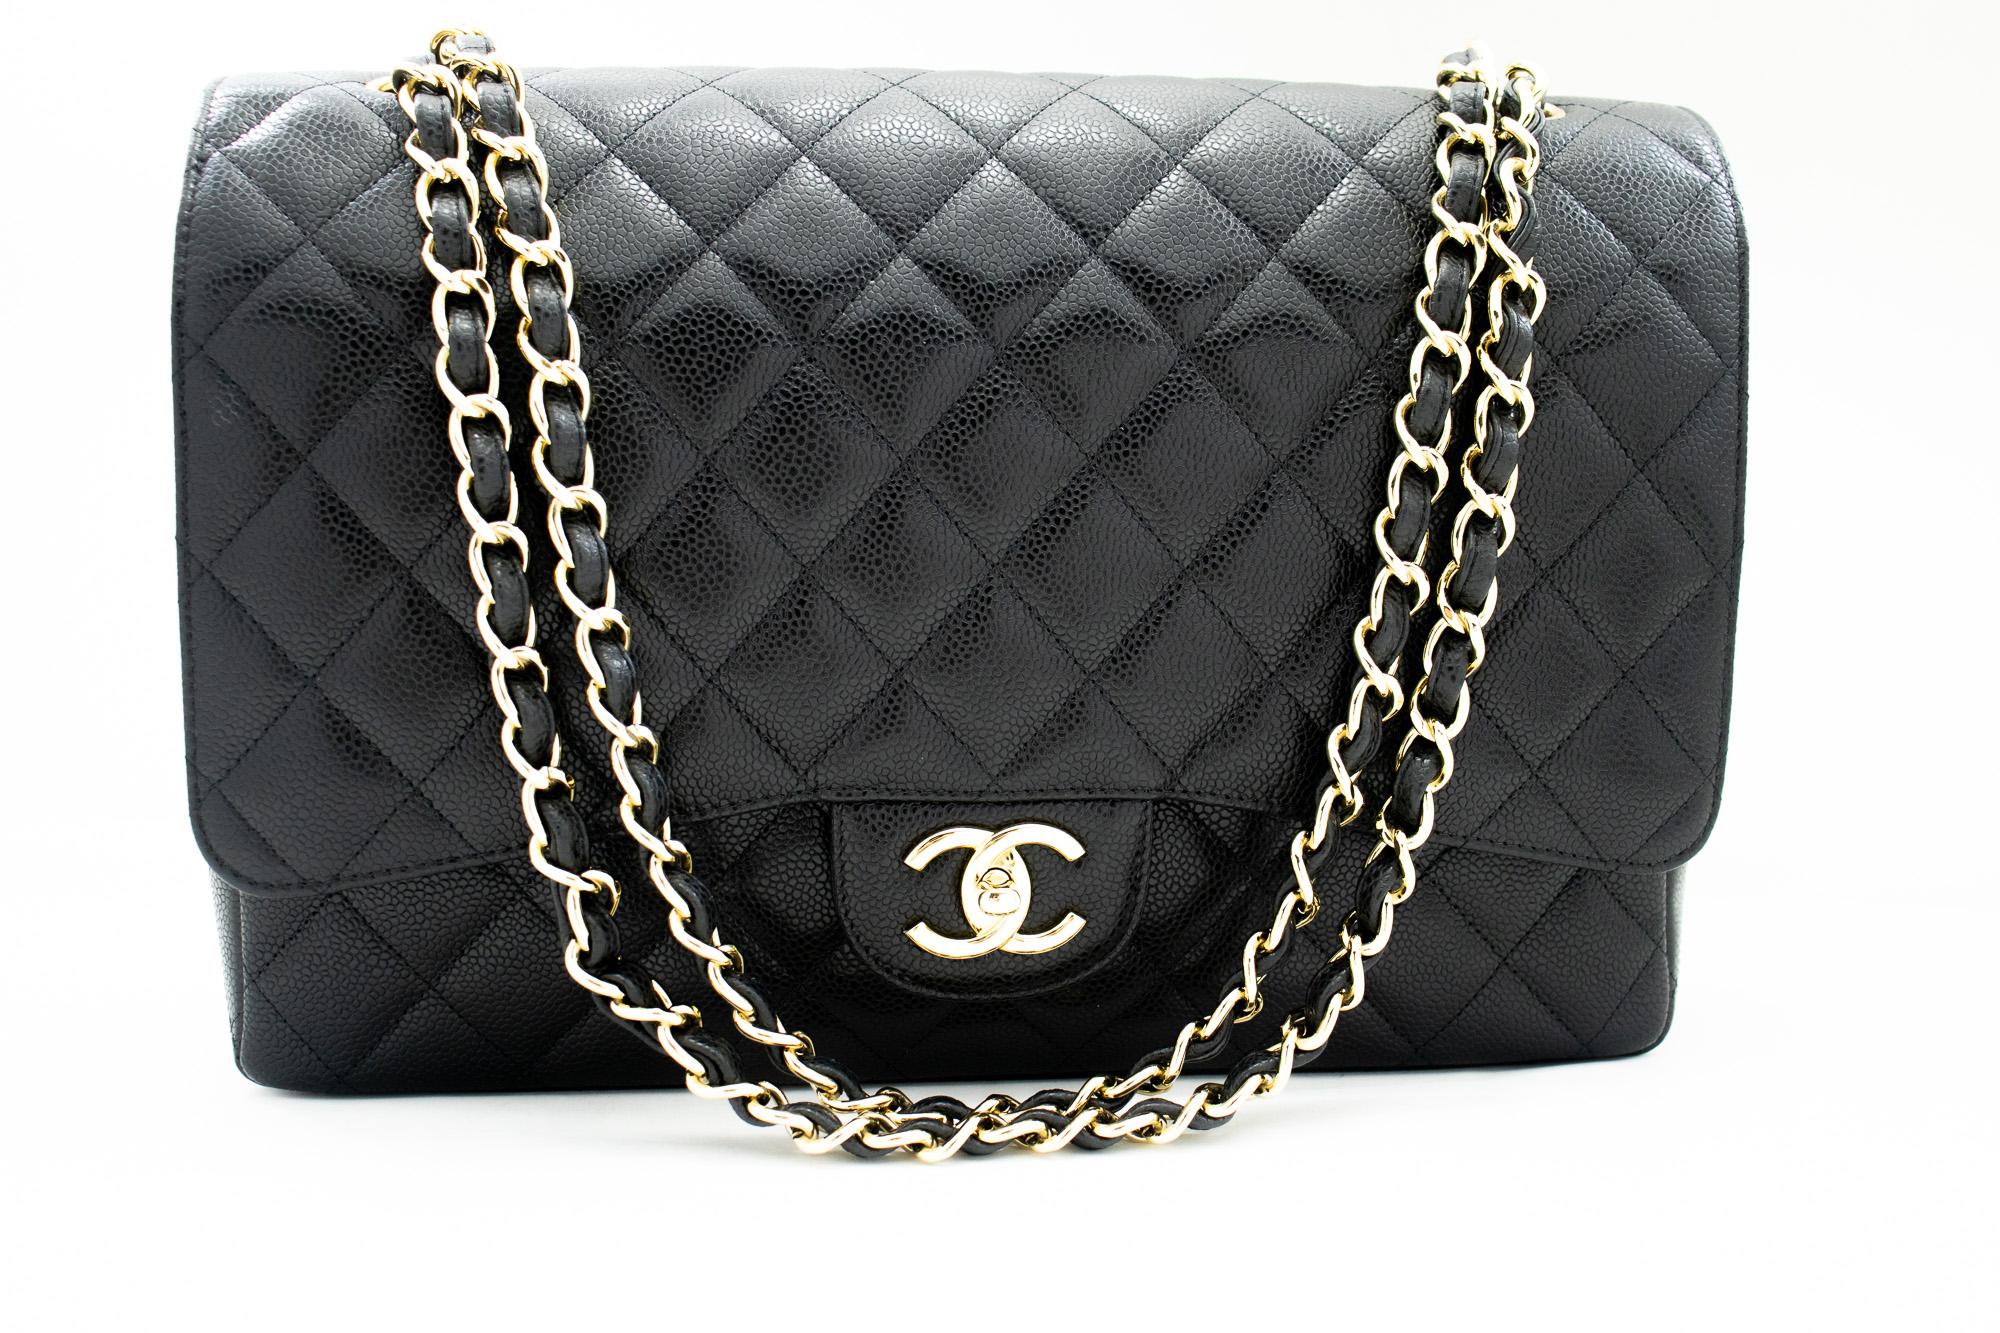 An authentic CHANEL Maxi Classic Handbag Grained Calfskin Double Flap Chain Shoulder Bag. The color is Black. The outside material is Leather. The pattern is Solid. This item is Contemporary. The year of manufacture would be 2011.
Conditions &